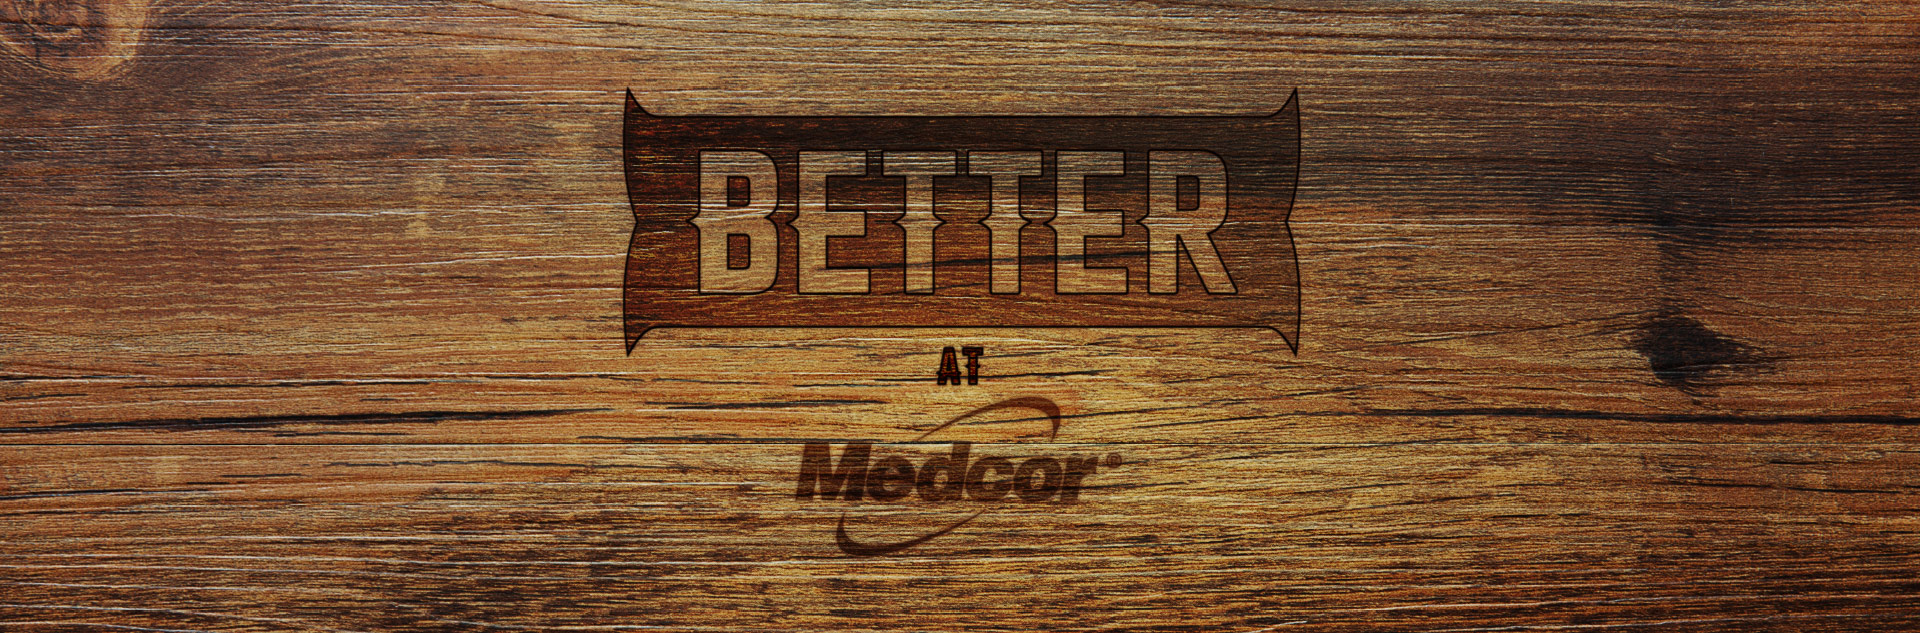 Better Me at Medcor